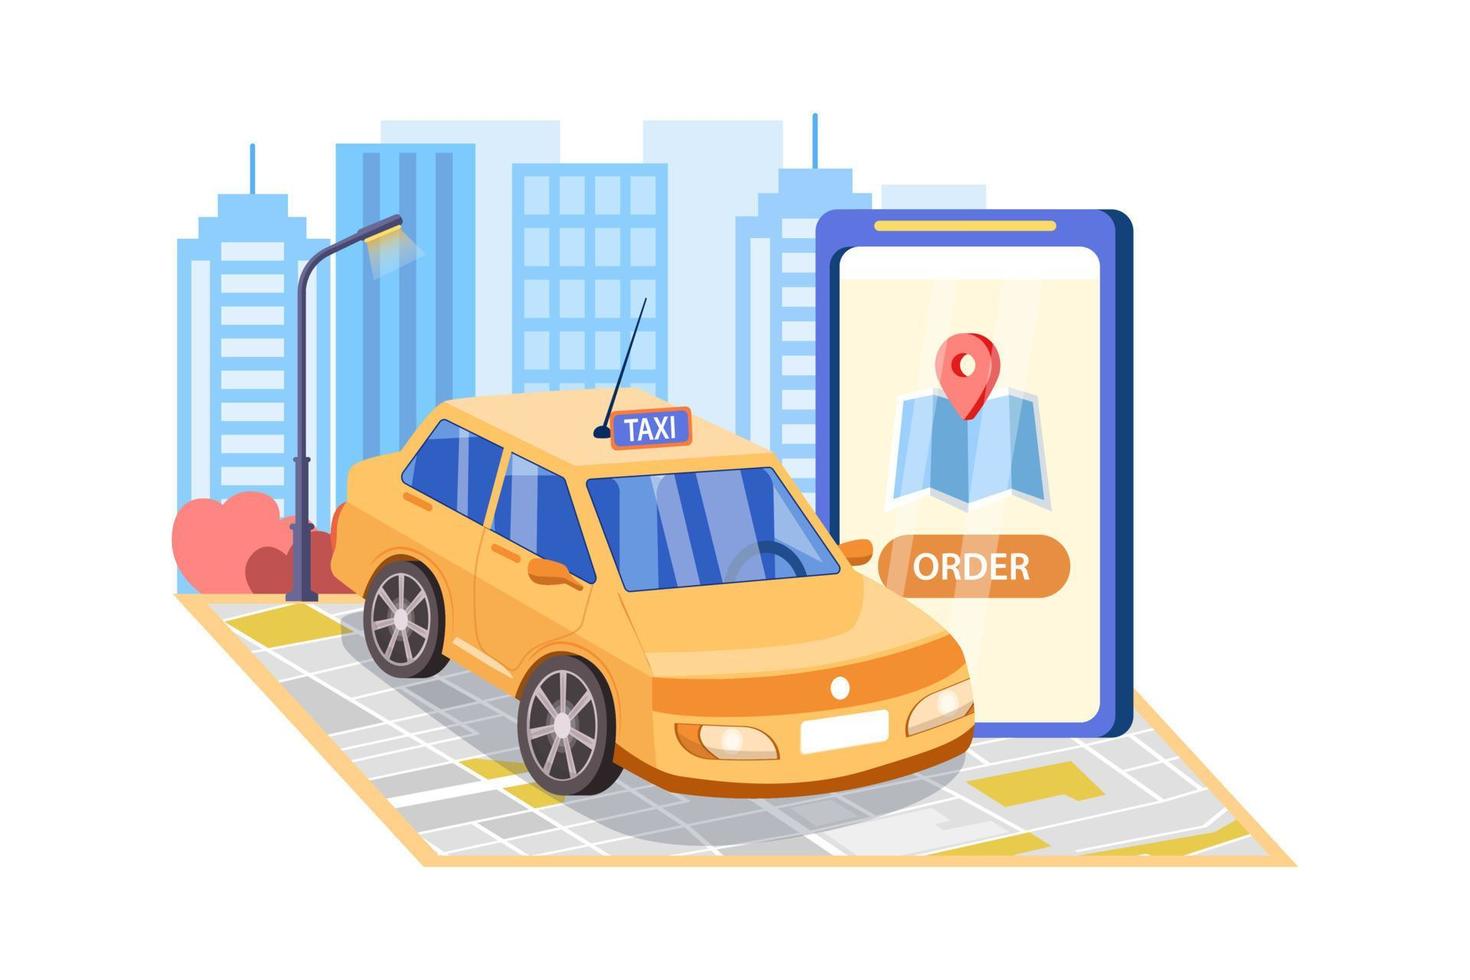 Smartphone with route and points location on a city map on the urban landscape background vector